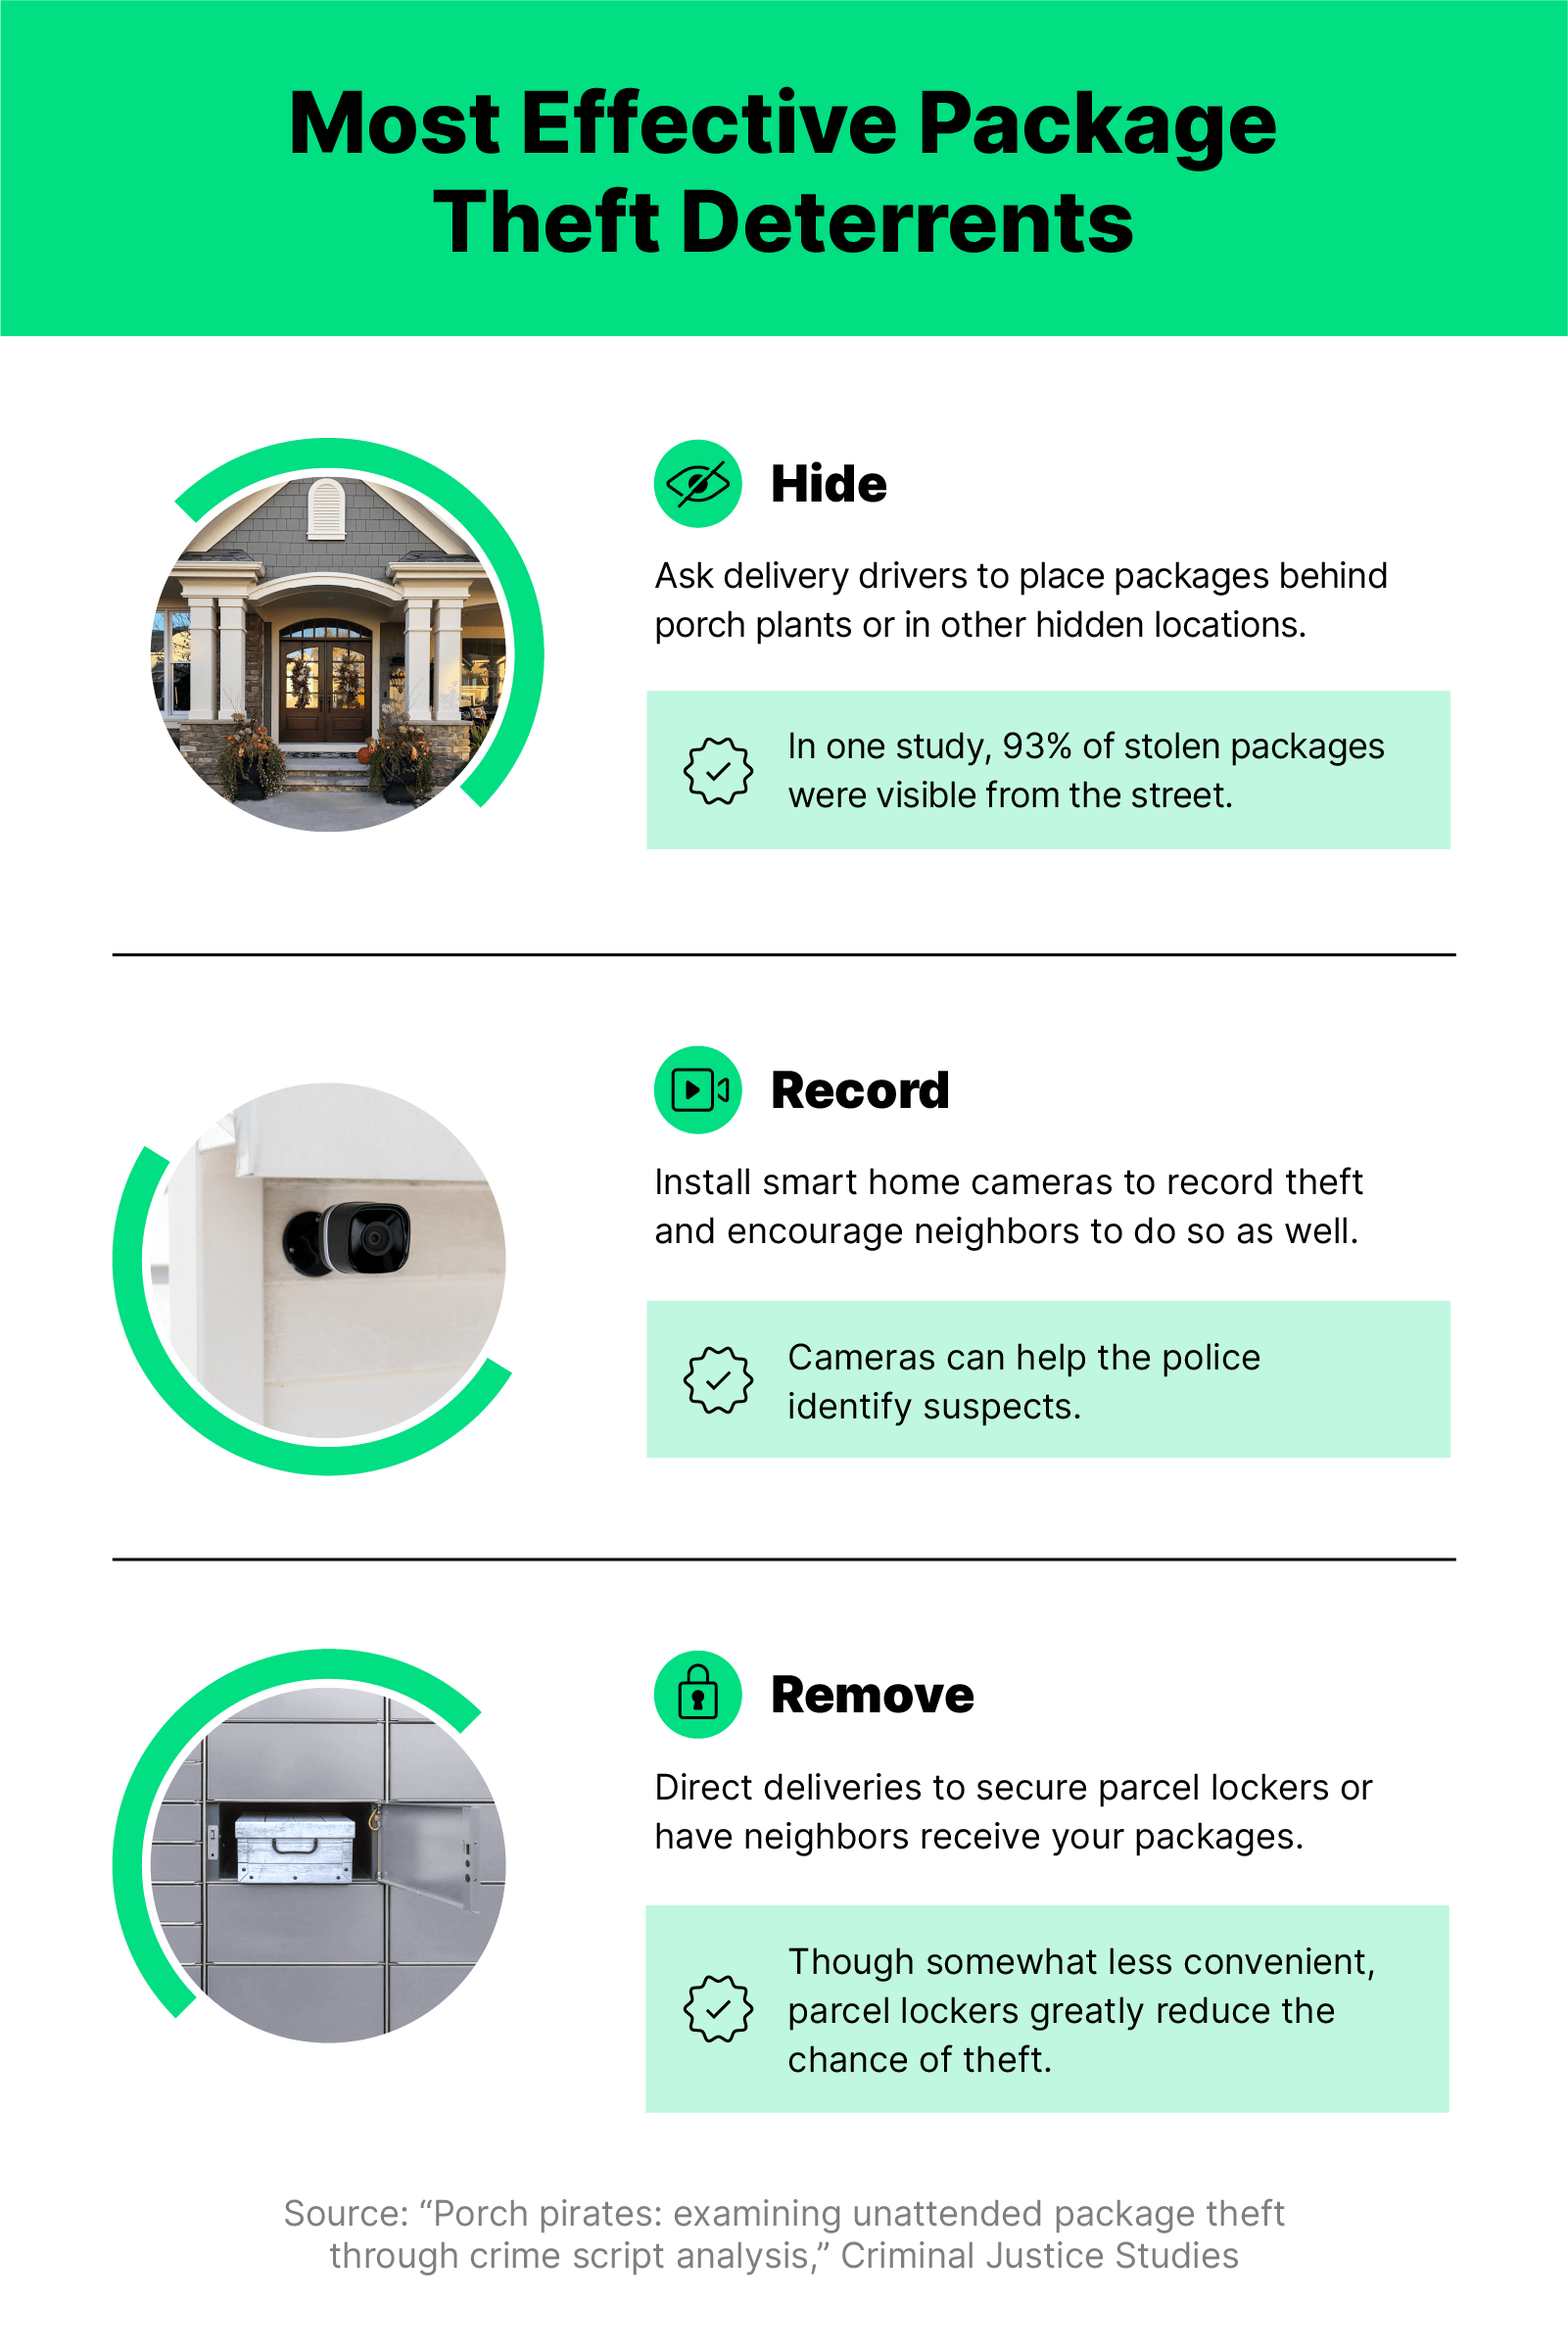 Images of a front door of a home, a outdoor security camera and a lockbox